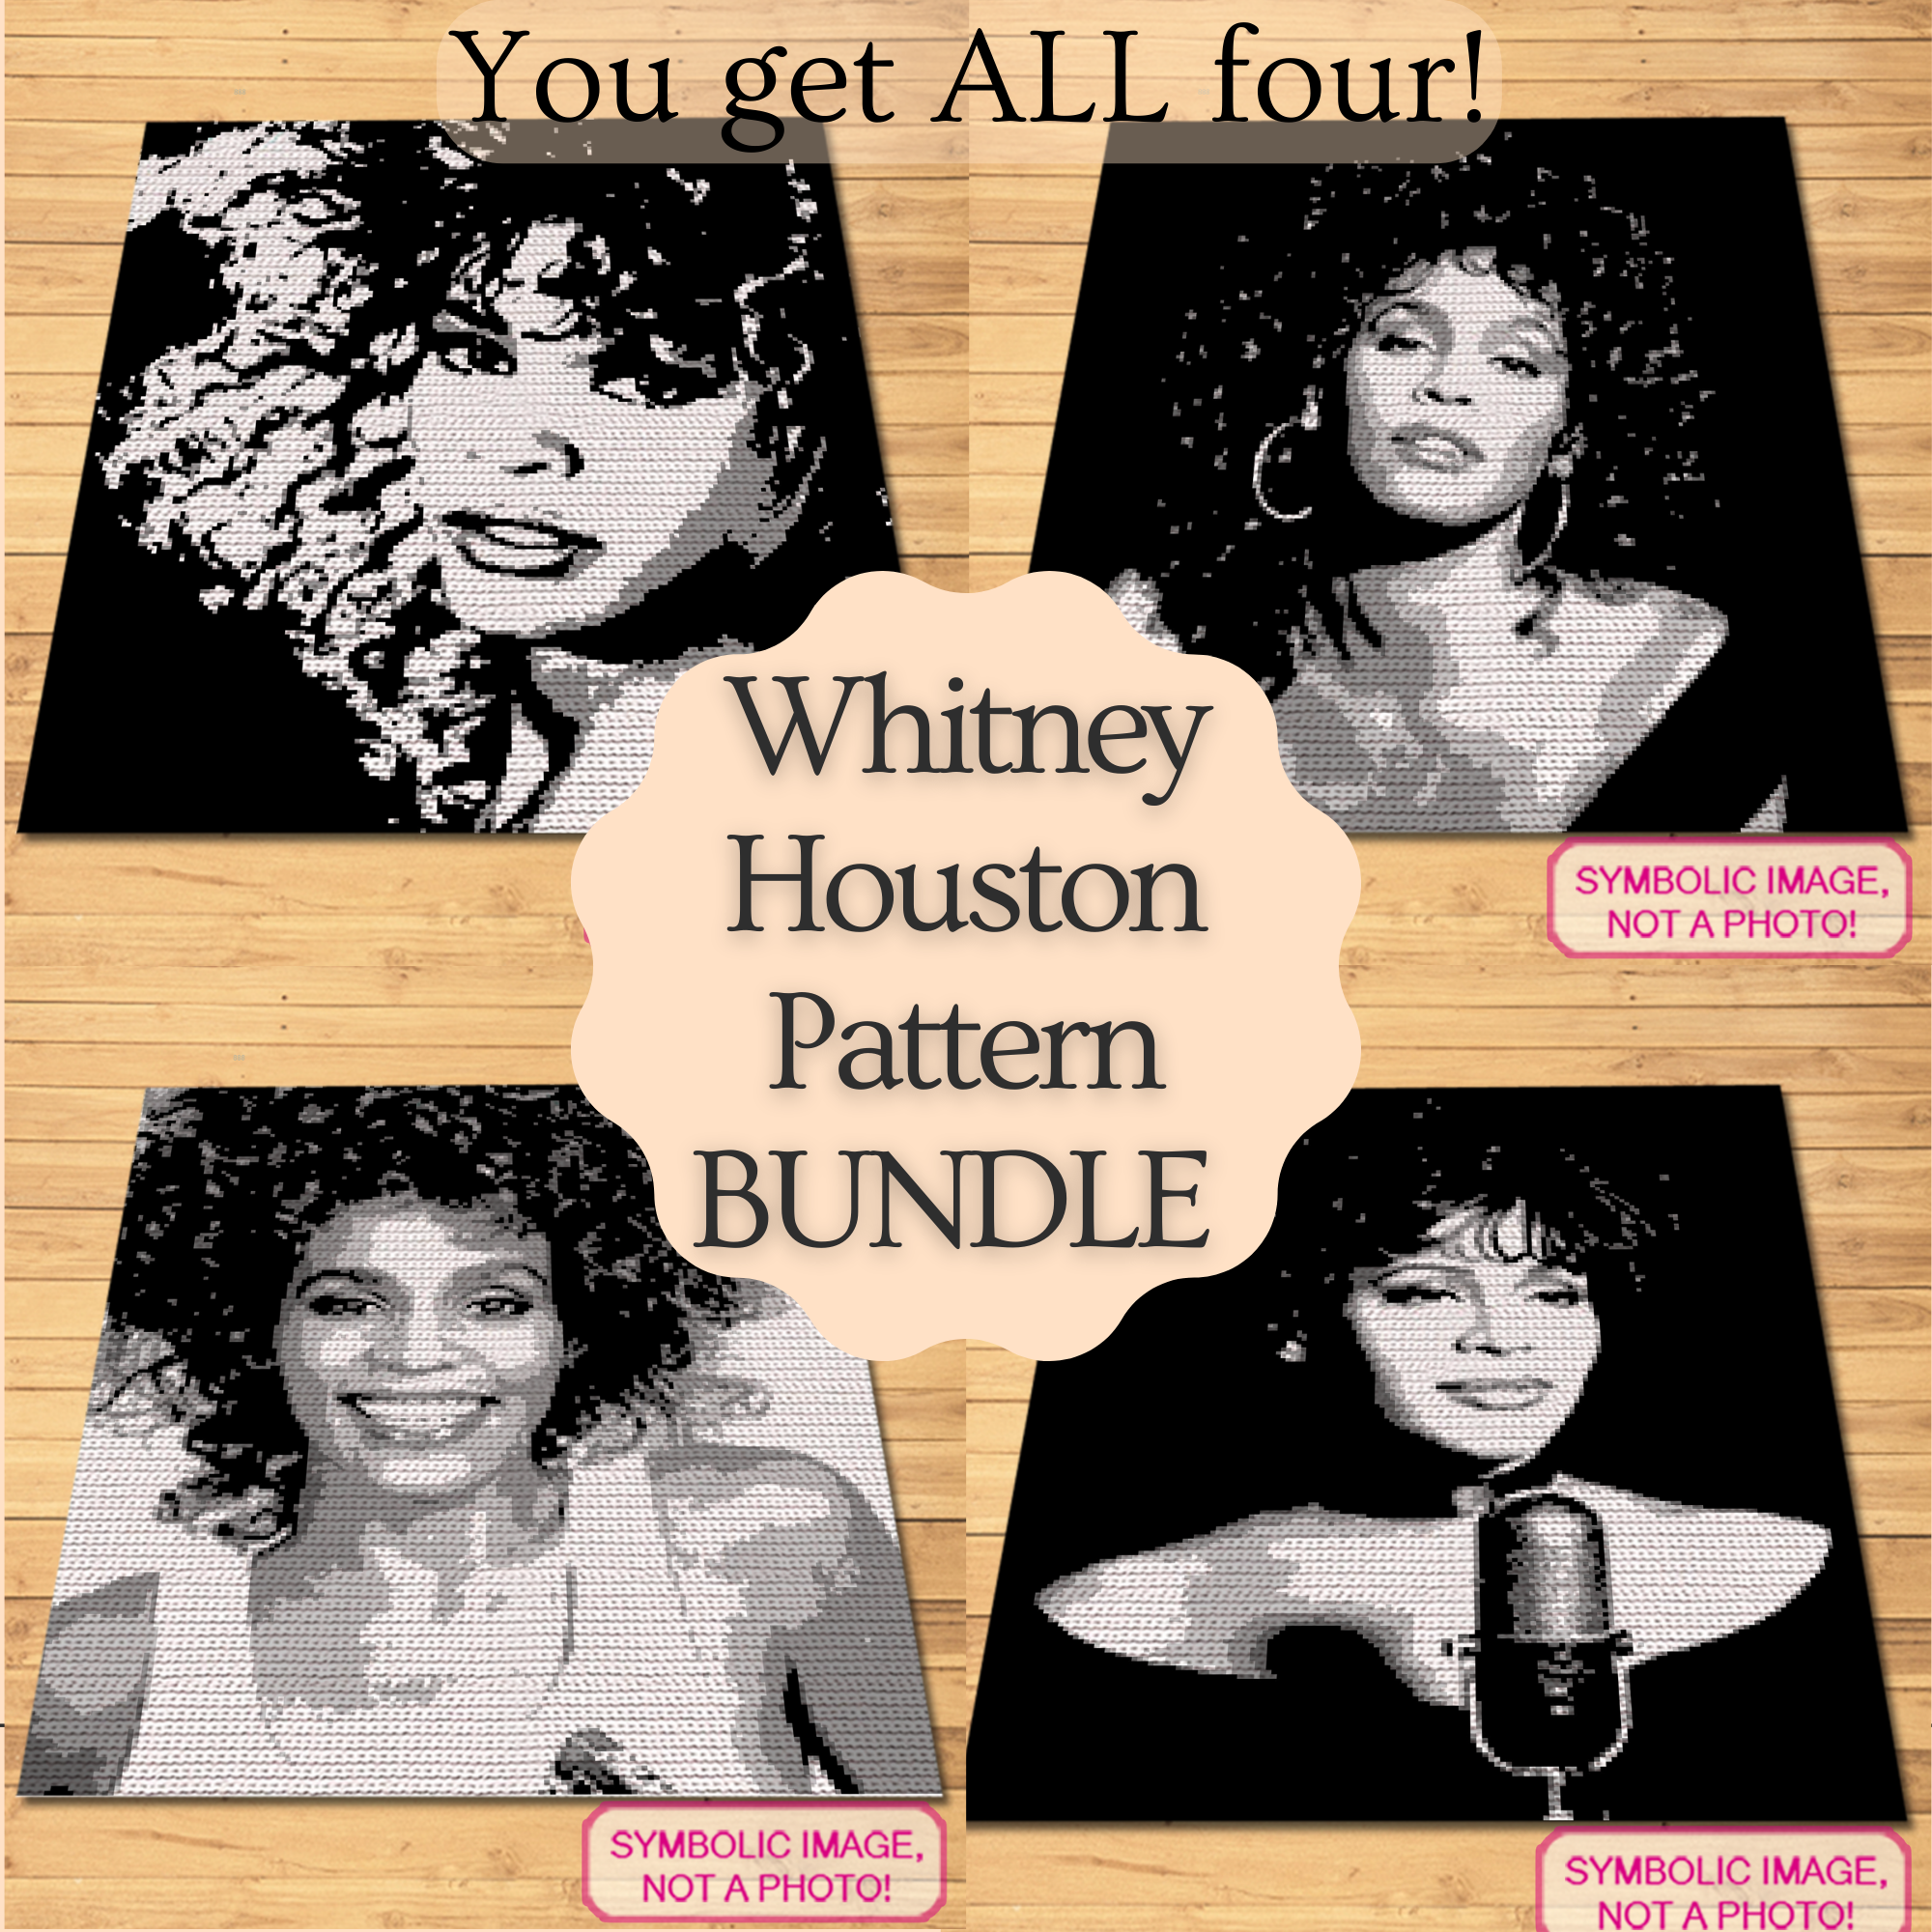 Whitney Houston Crochet Blanket Pattern Bundle - Unleash Your Creative Soul!  A special project for all Whitney Houston fans out there! My Crochet Blanket Pattern brings the Superstar to your living room. Purchase now and get crafting! Click to learn more!